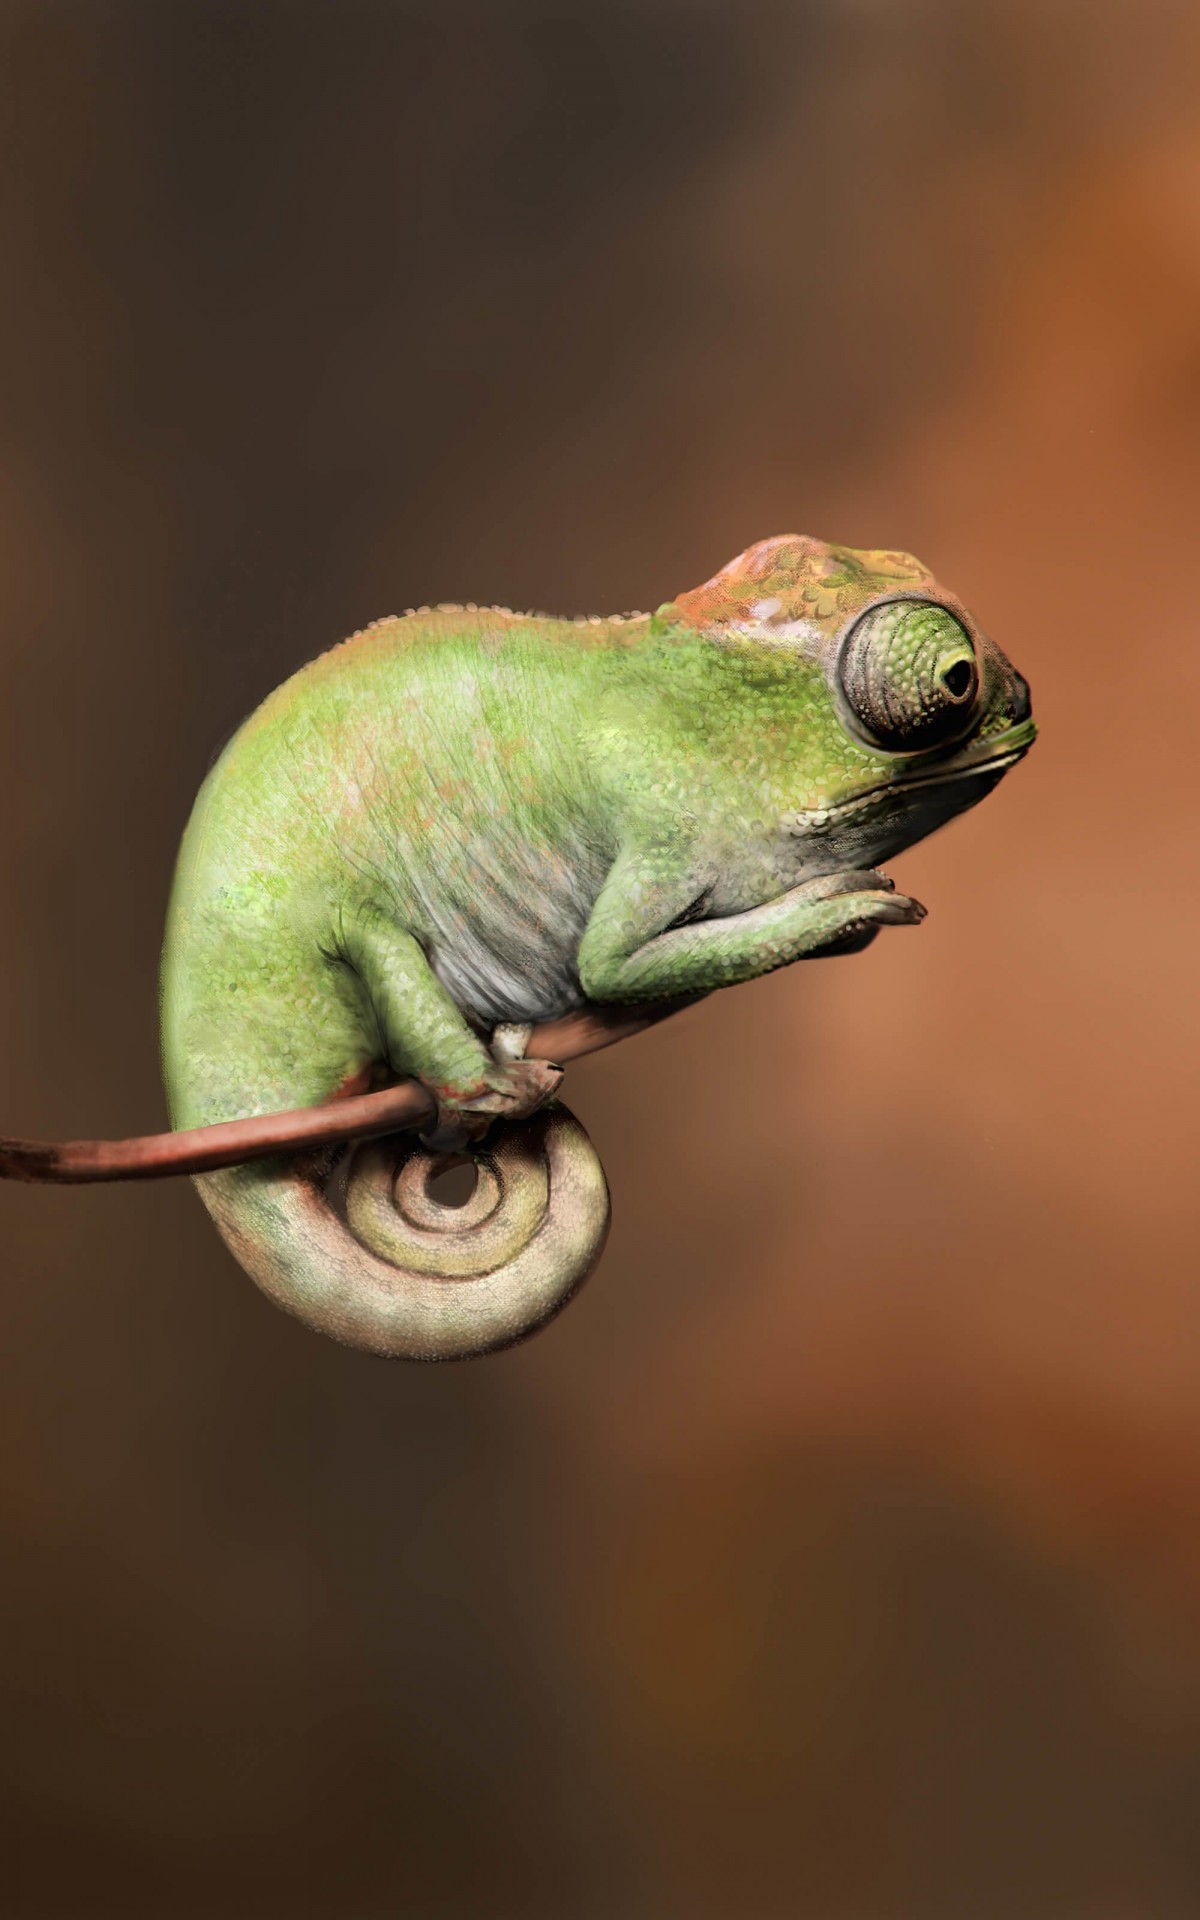 Baby Chameleon Perching On a Twisted Branch Wallpaper for Amazon Kindle Fire HDX